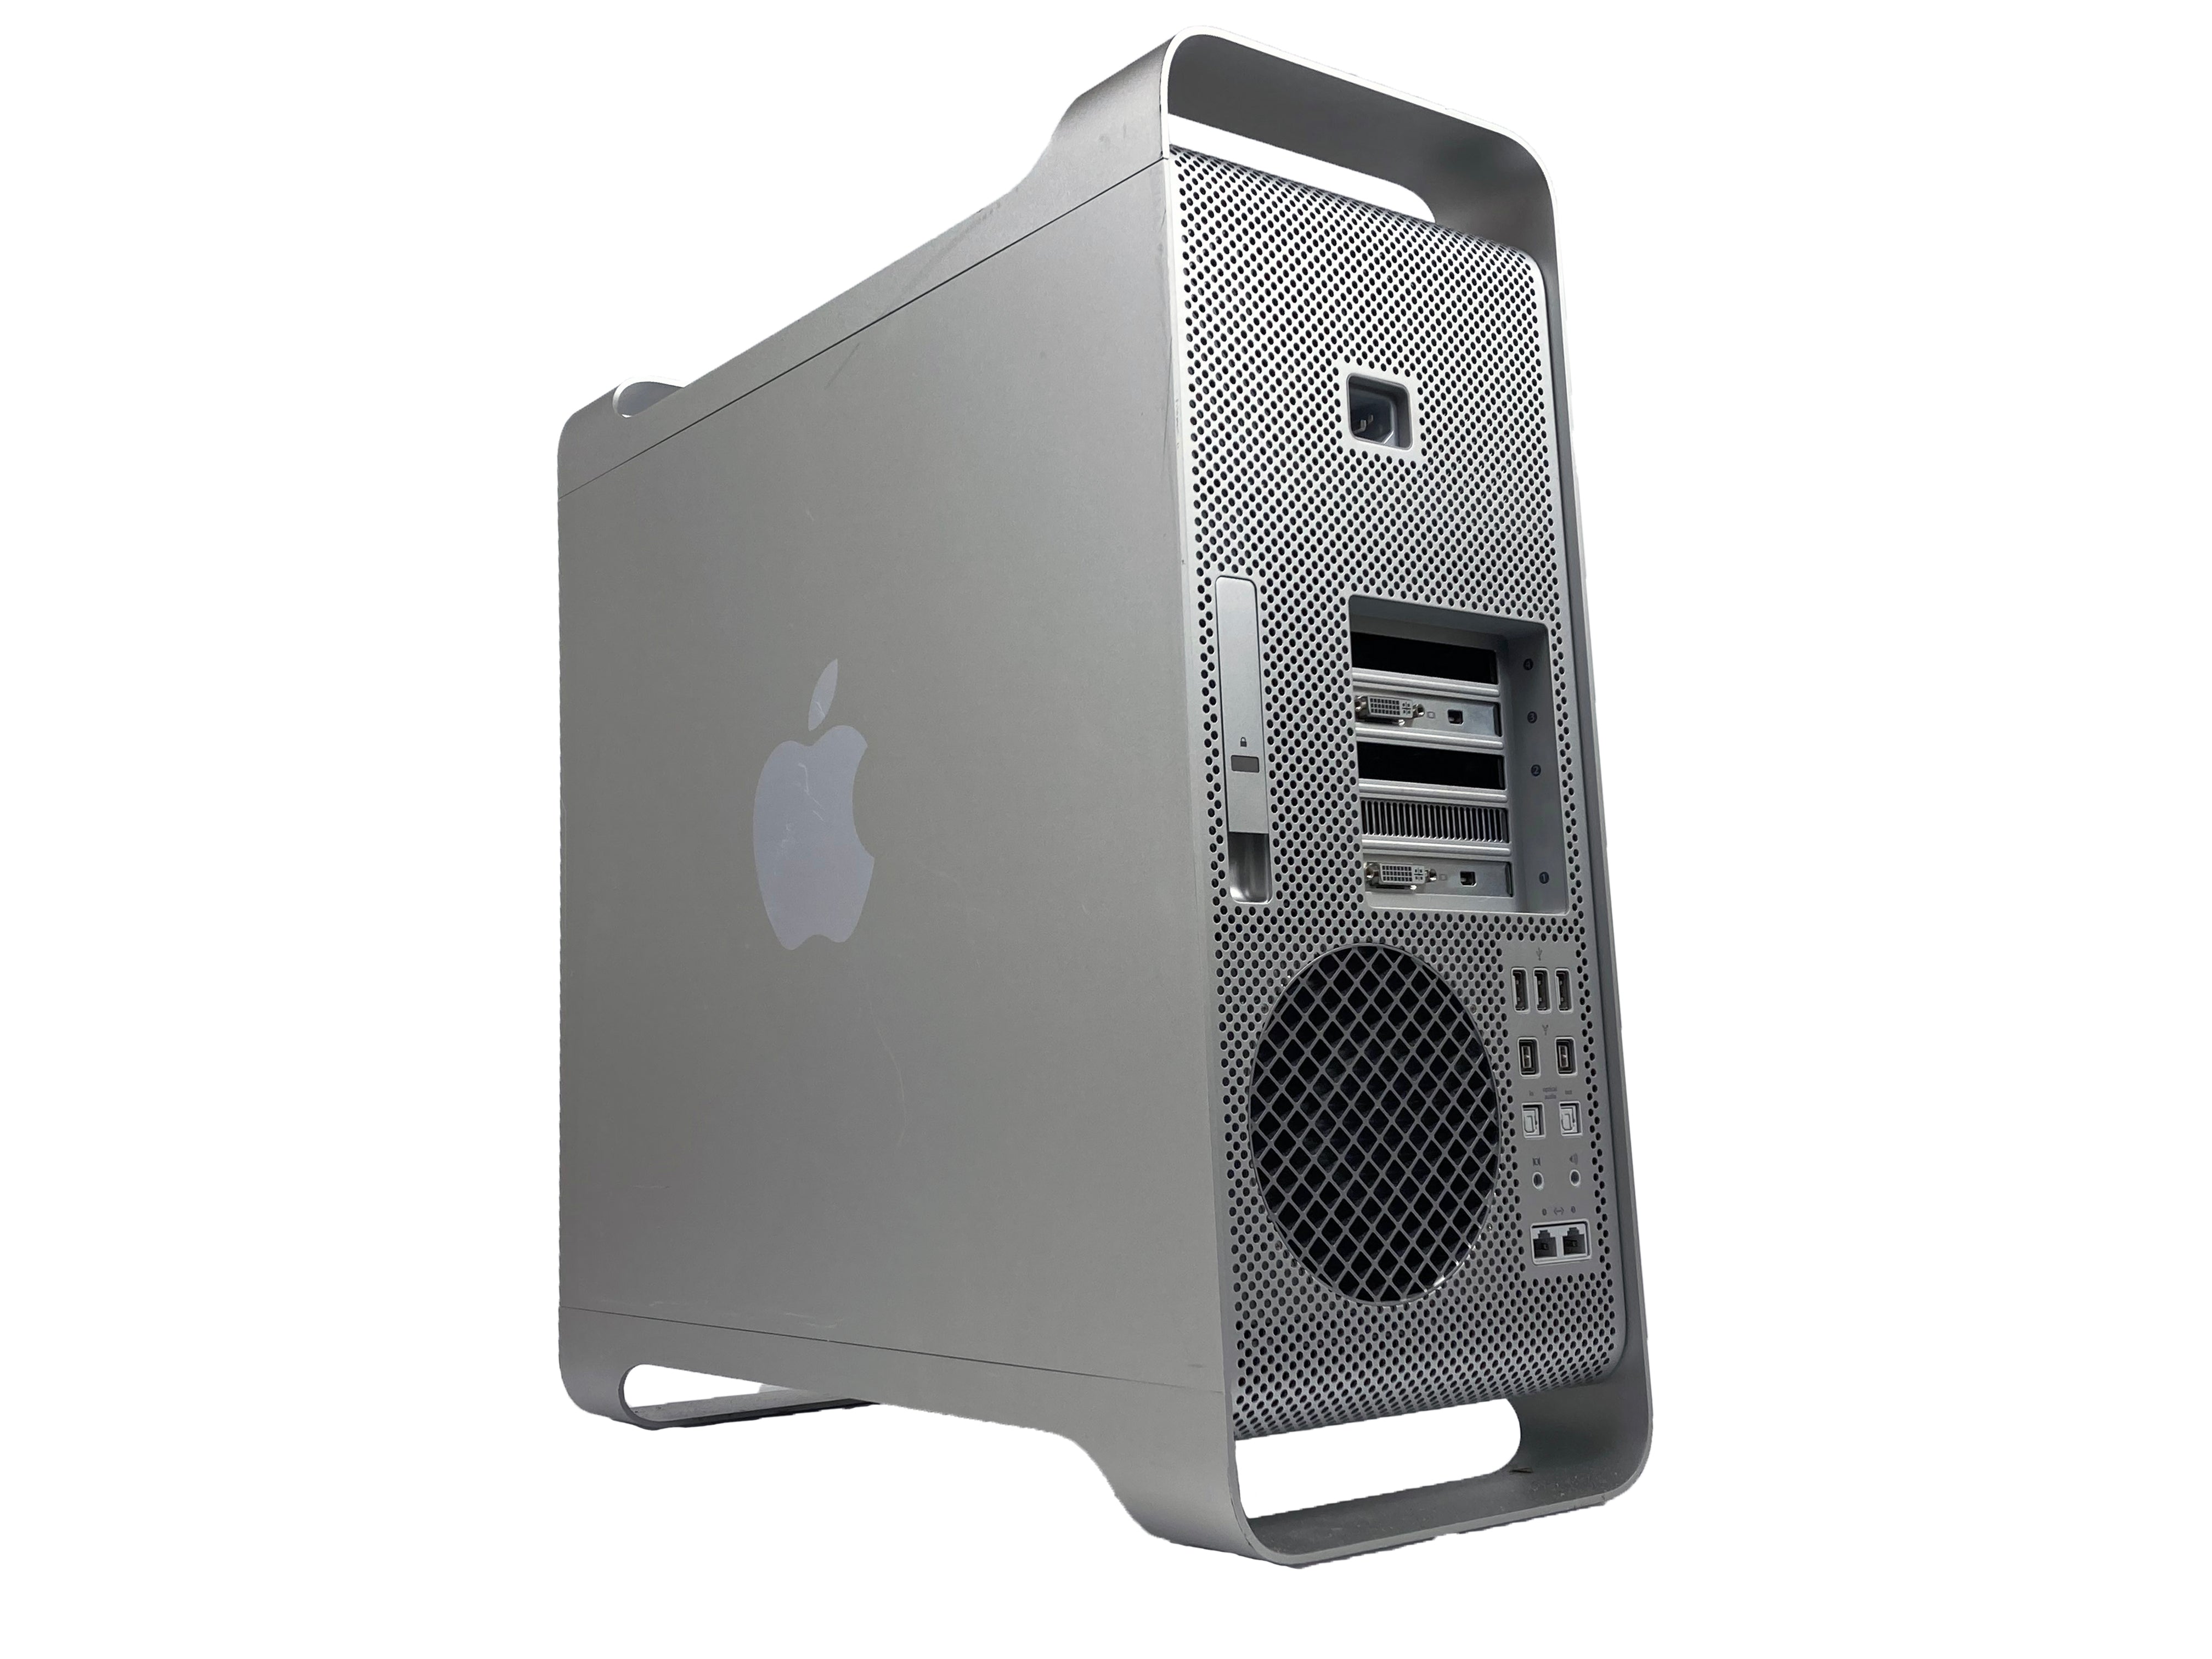 Apple MacPro "Quad Core" 2.9Ghz i5 (Early 2009) #1